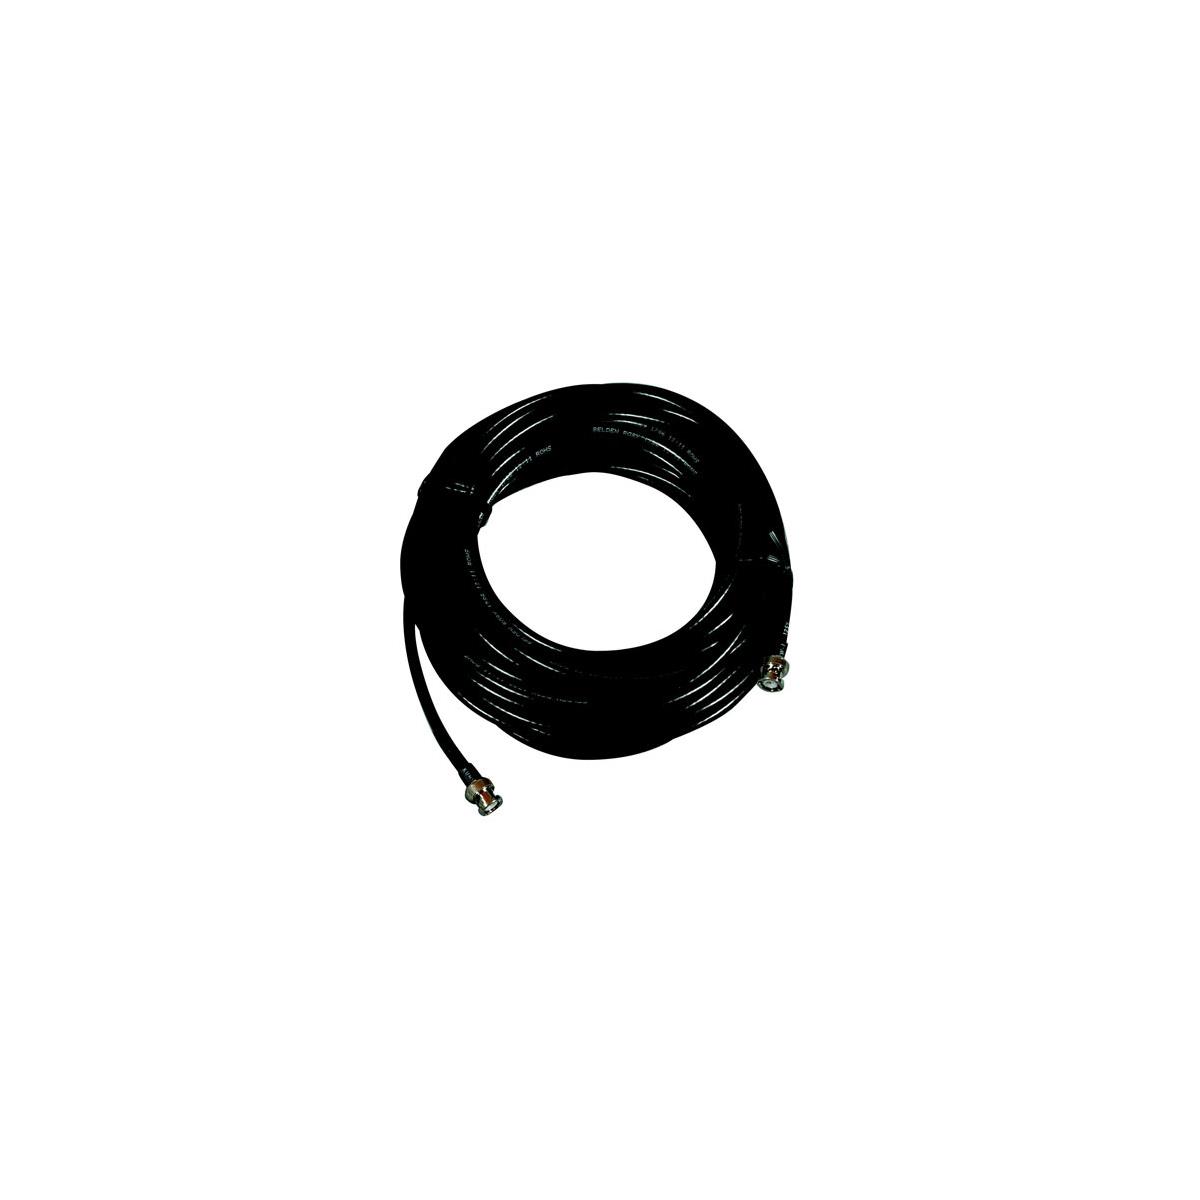 Image of Shure UA850 50' BNC-to-BNC Remote Antenna Extension Cable